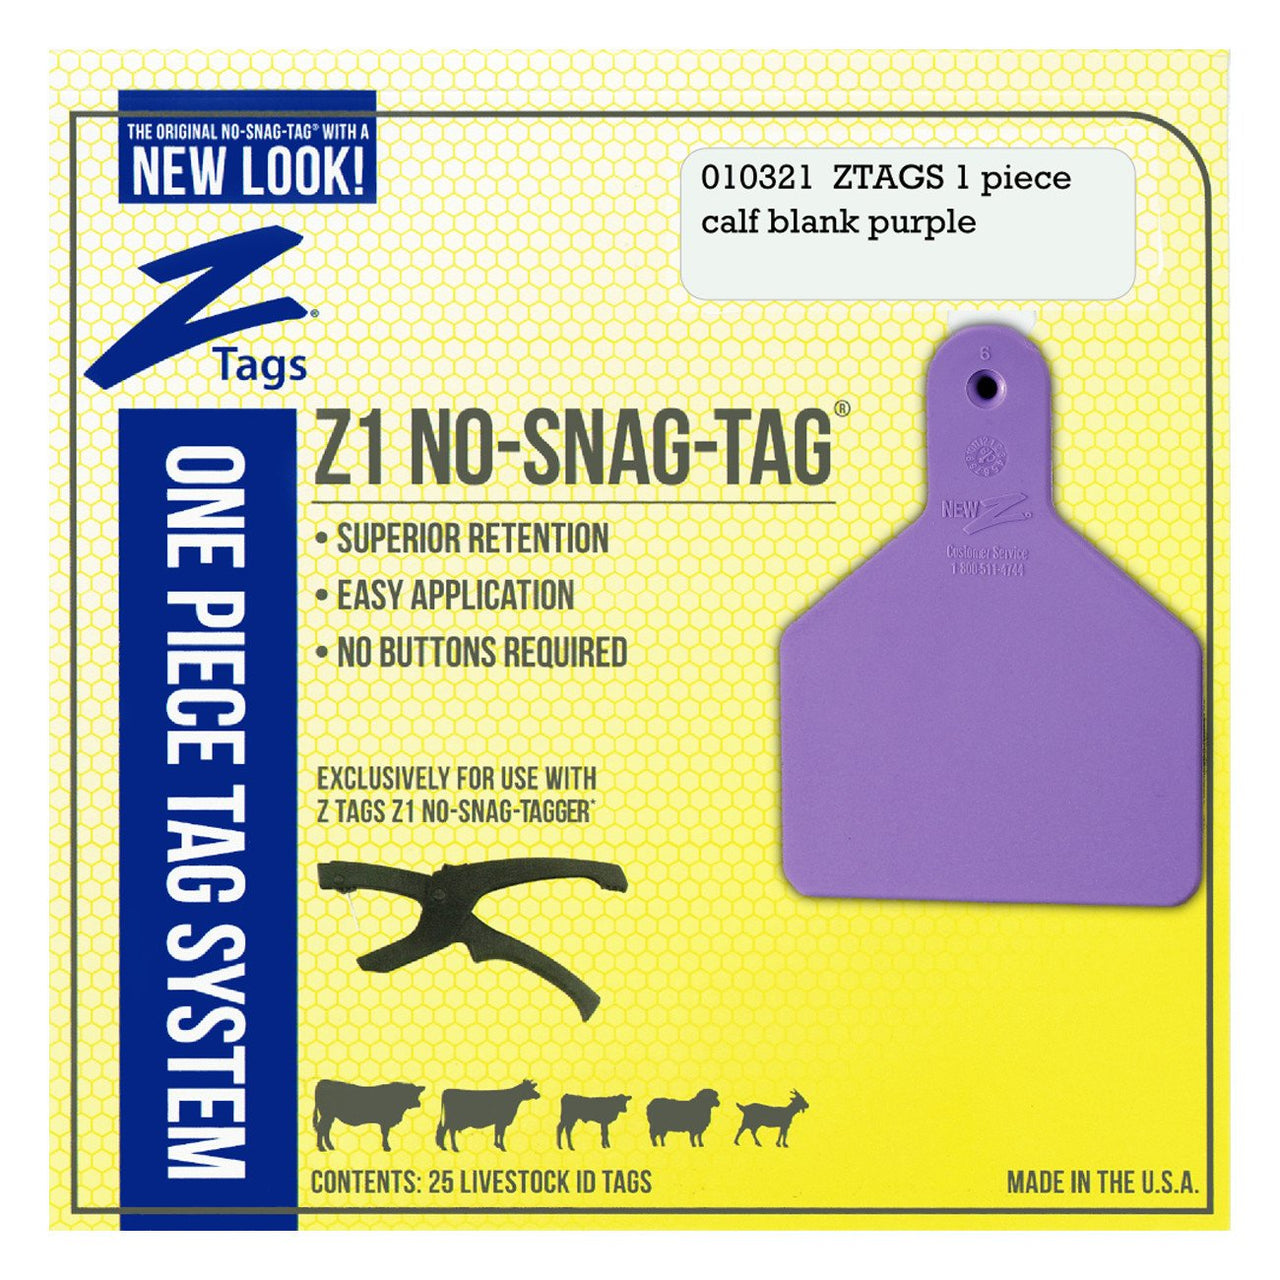 Z Tags 1 Piece Calf Blank (Purple) 25 Pack - 1 Piece Short Neck Calf Blank Tag Z Tags - Canada